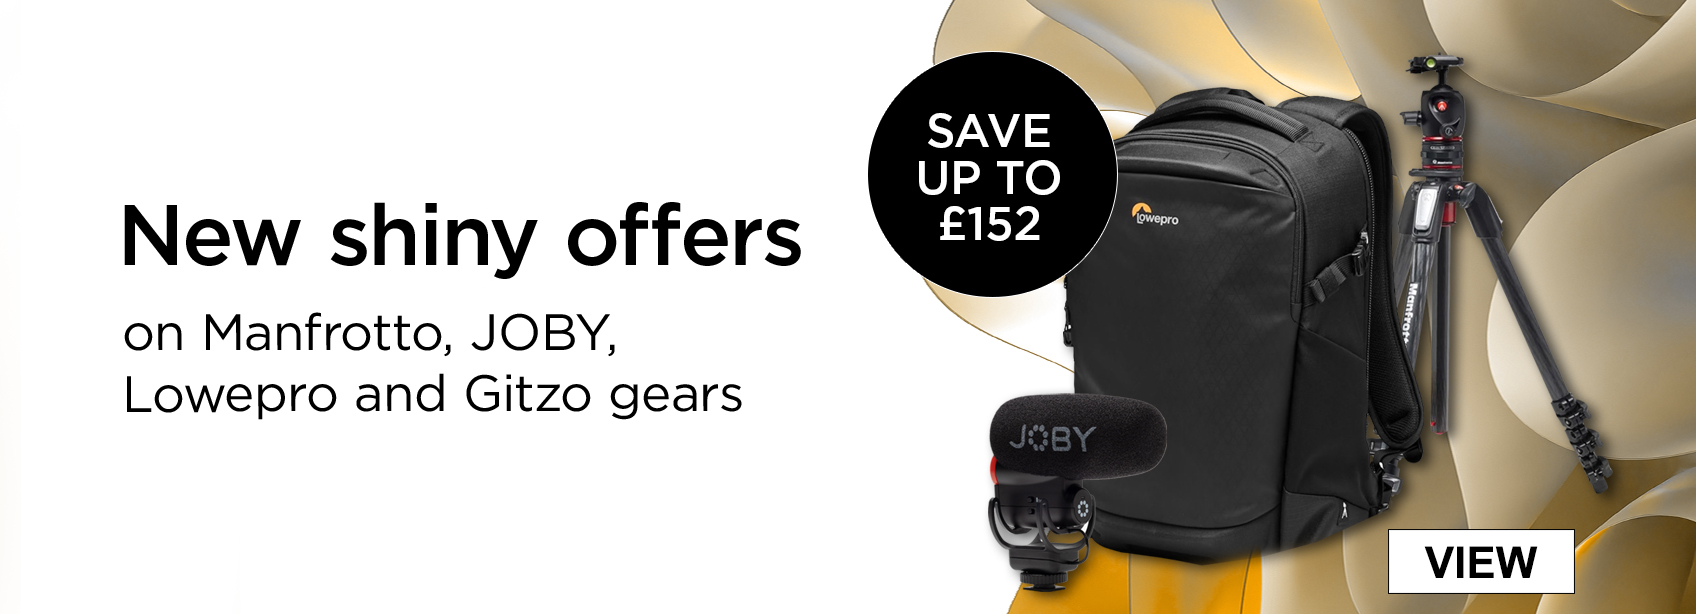 New Shiny offers on Manfrotto, JOBY, Lowepro and Gitzo gear